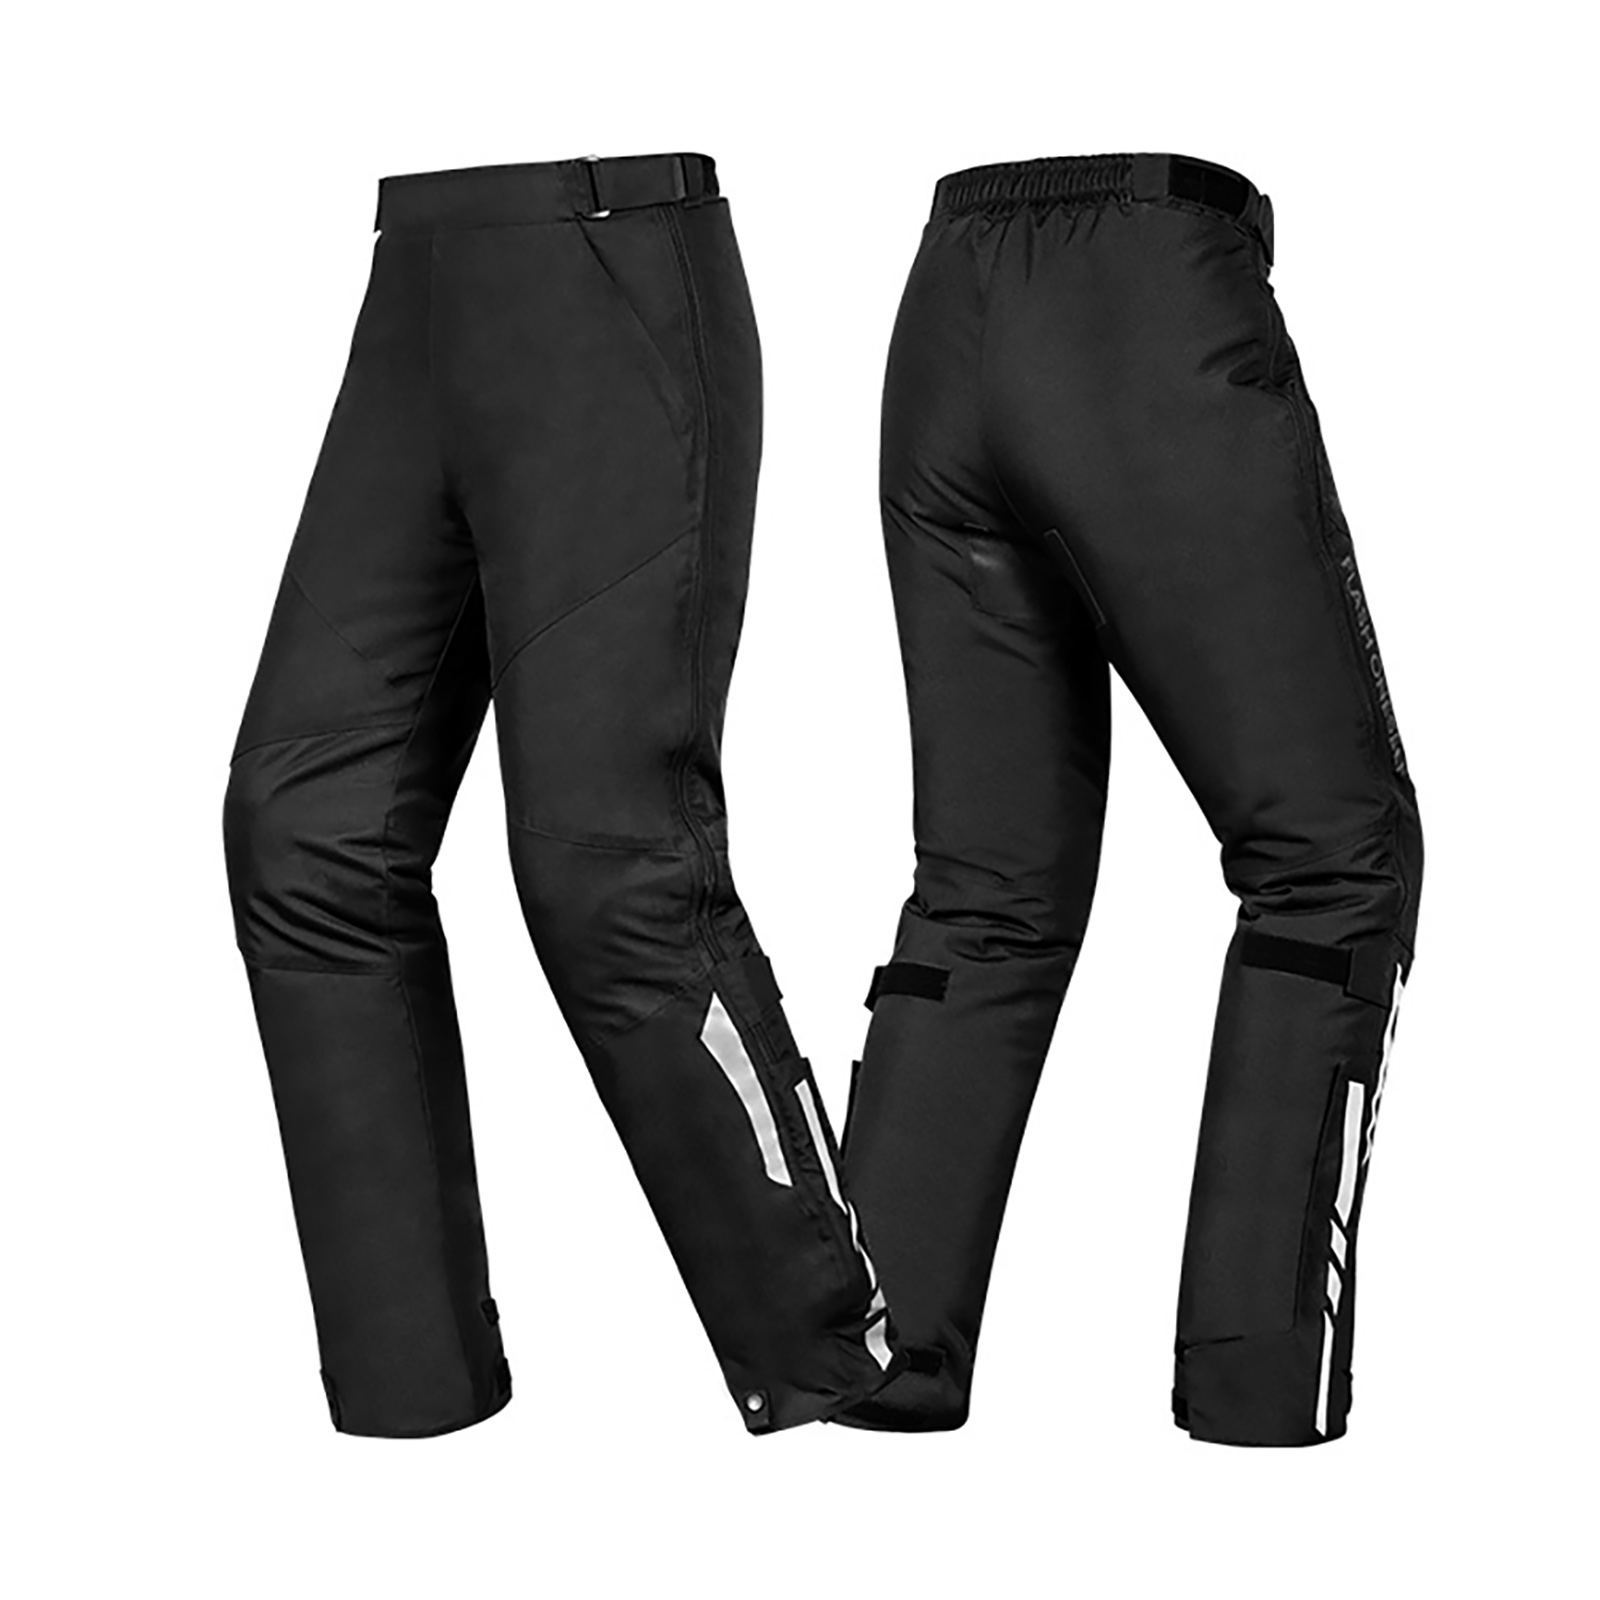 Detachable Winter Motorcycle Riding Pants CE 2 Armored Protection Reflective Dual Zipper Cold Weather Dirt Bike Overpants